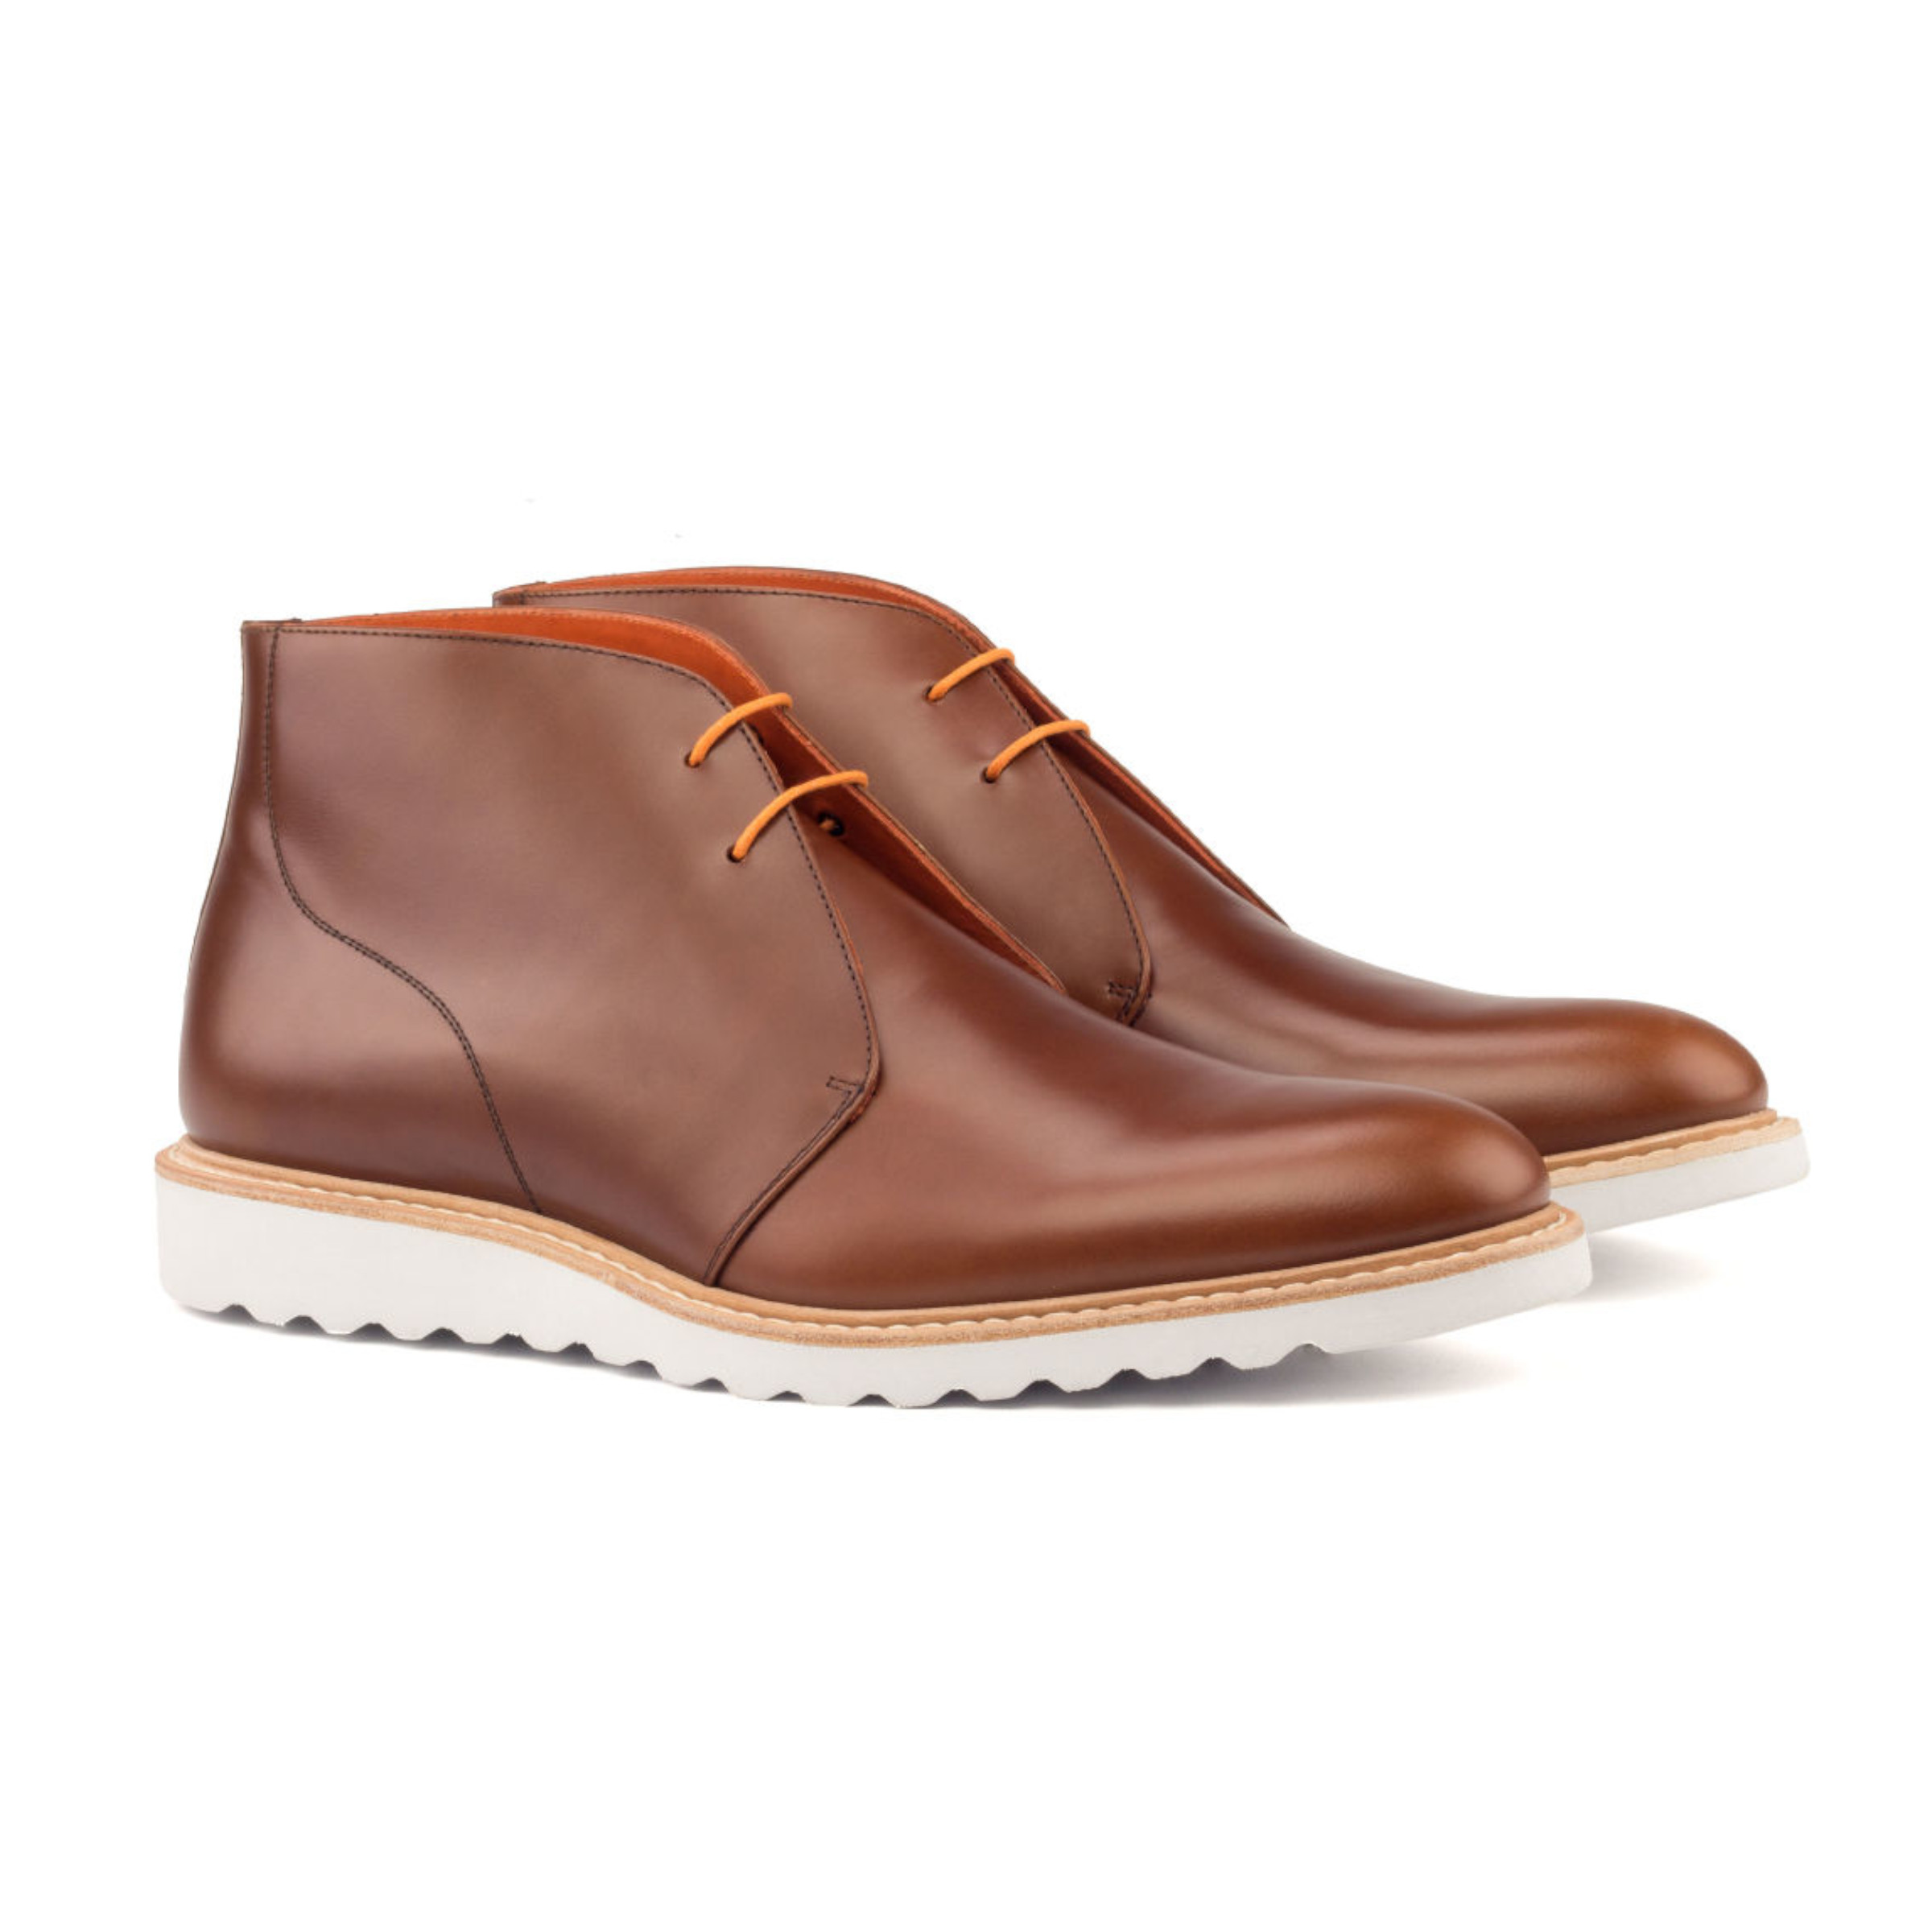 The Arborist: Polished Cognac. Front side facing view of cognac polished calf leather ankle style boots with orange laces and white soles on a white background